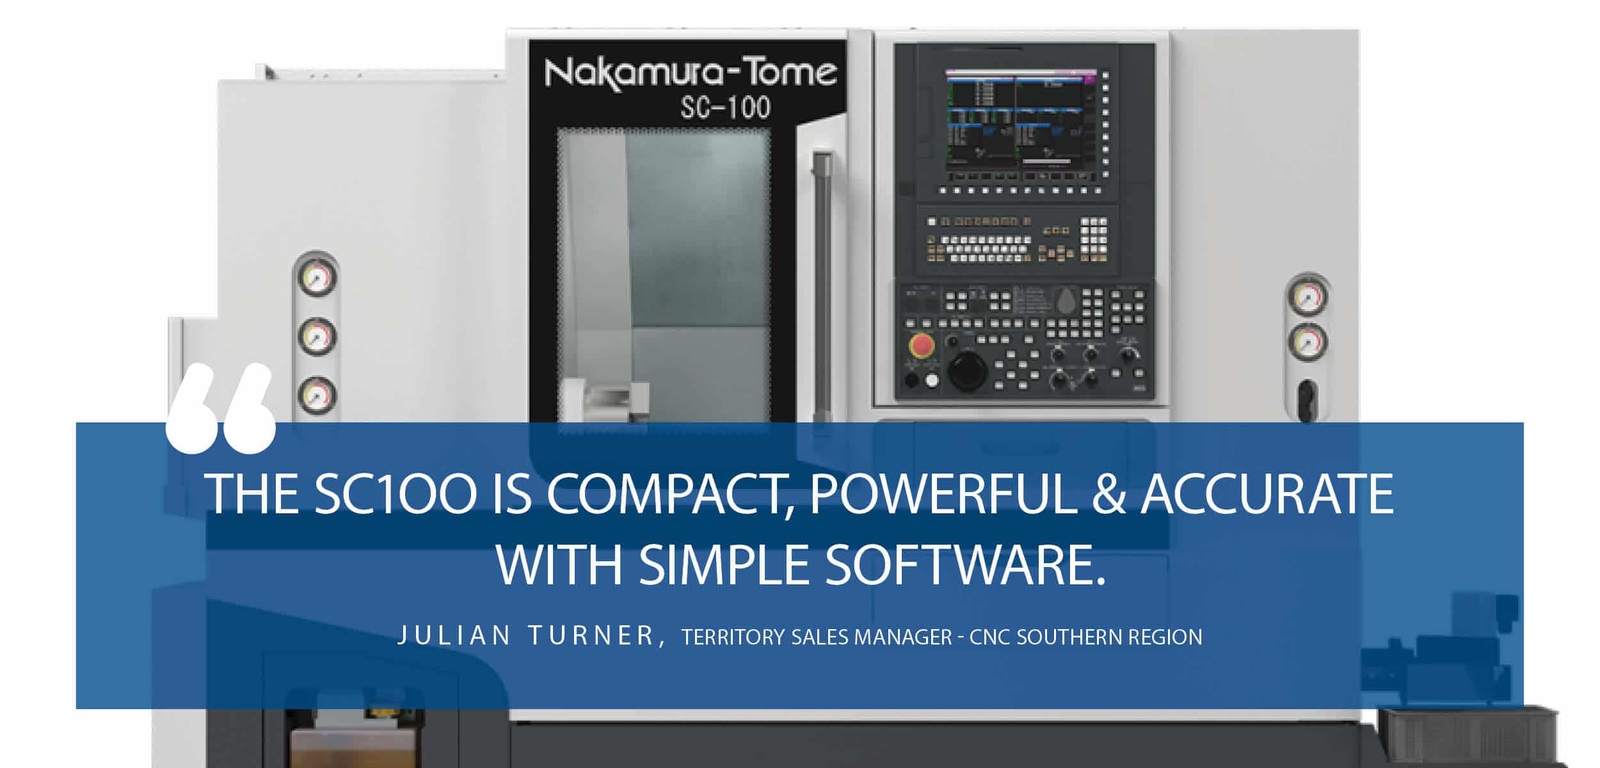 Nakamura-Tome’s SC100, Twin Spindle with Milling